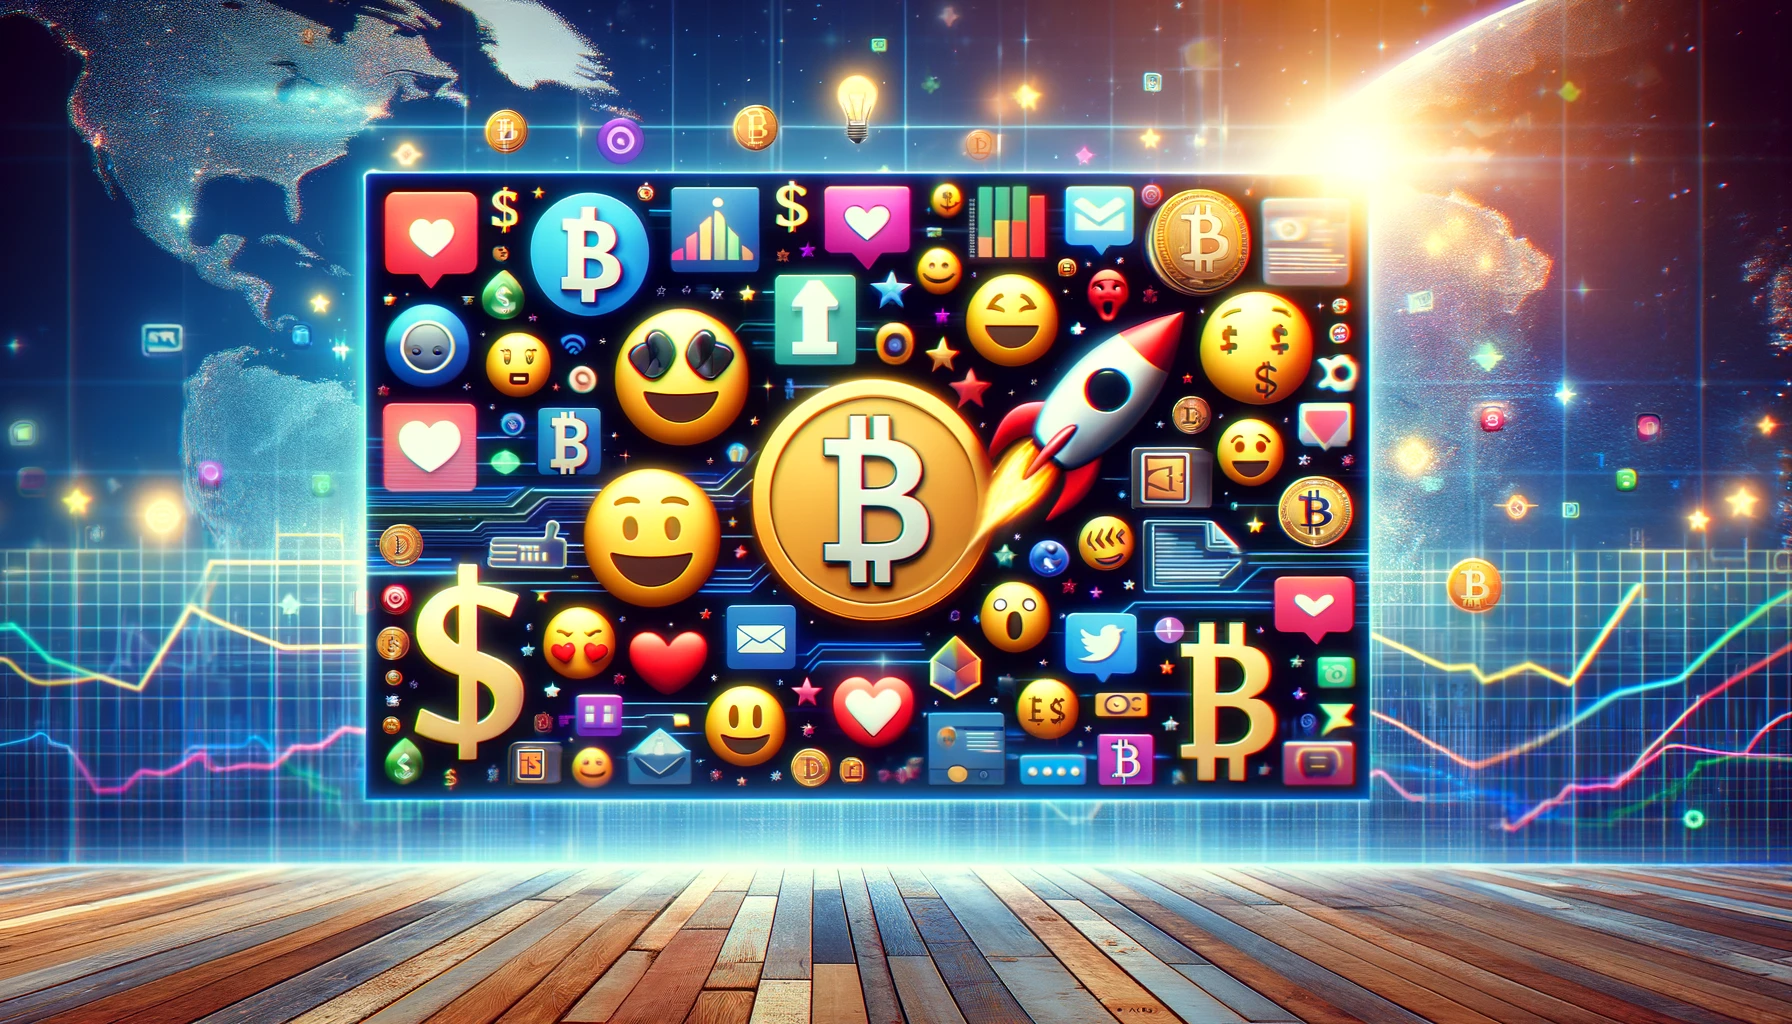 (Image: Machine.News) Find out how to predict the price of crypto such as Bitcoin, Ether, Litecoin, Dogecoin and more